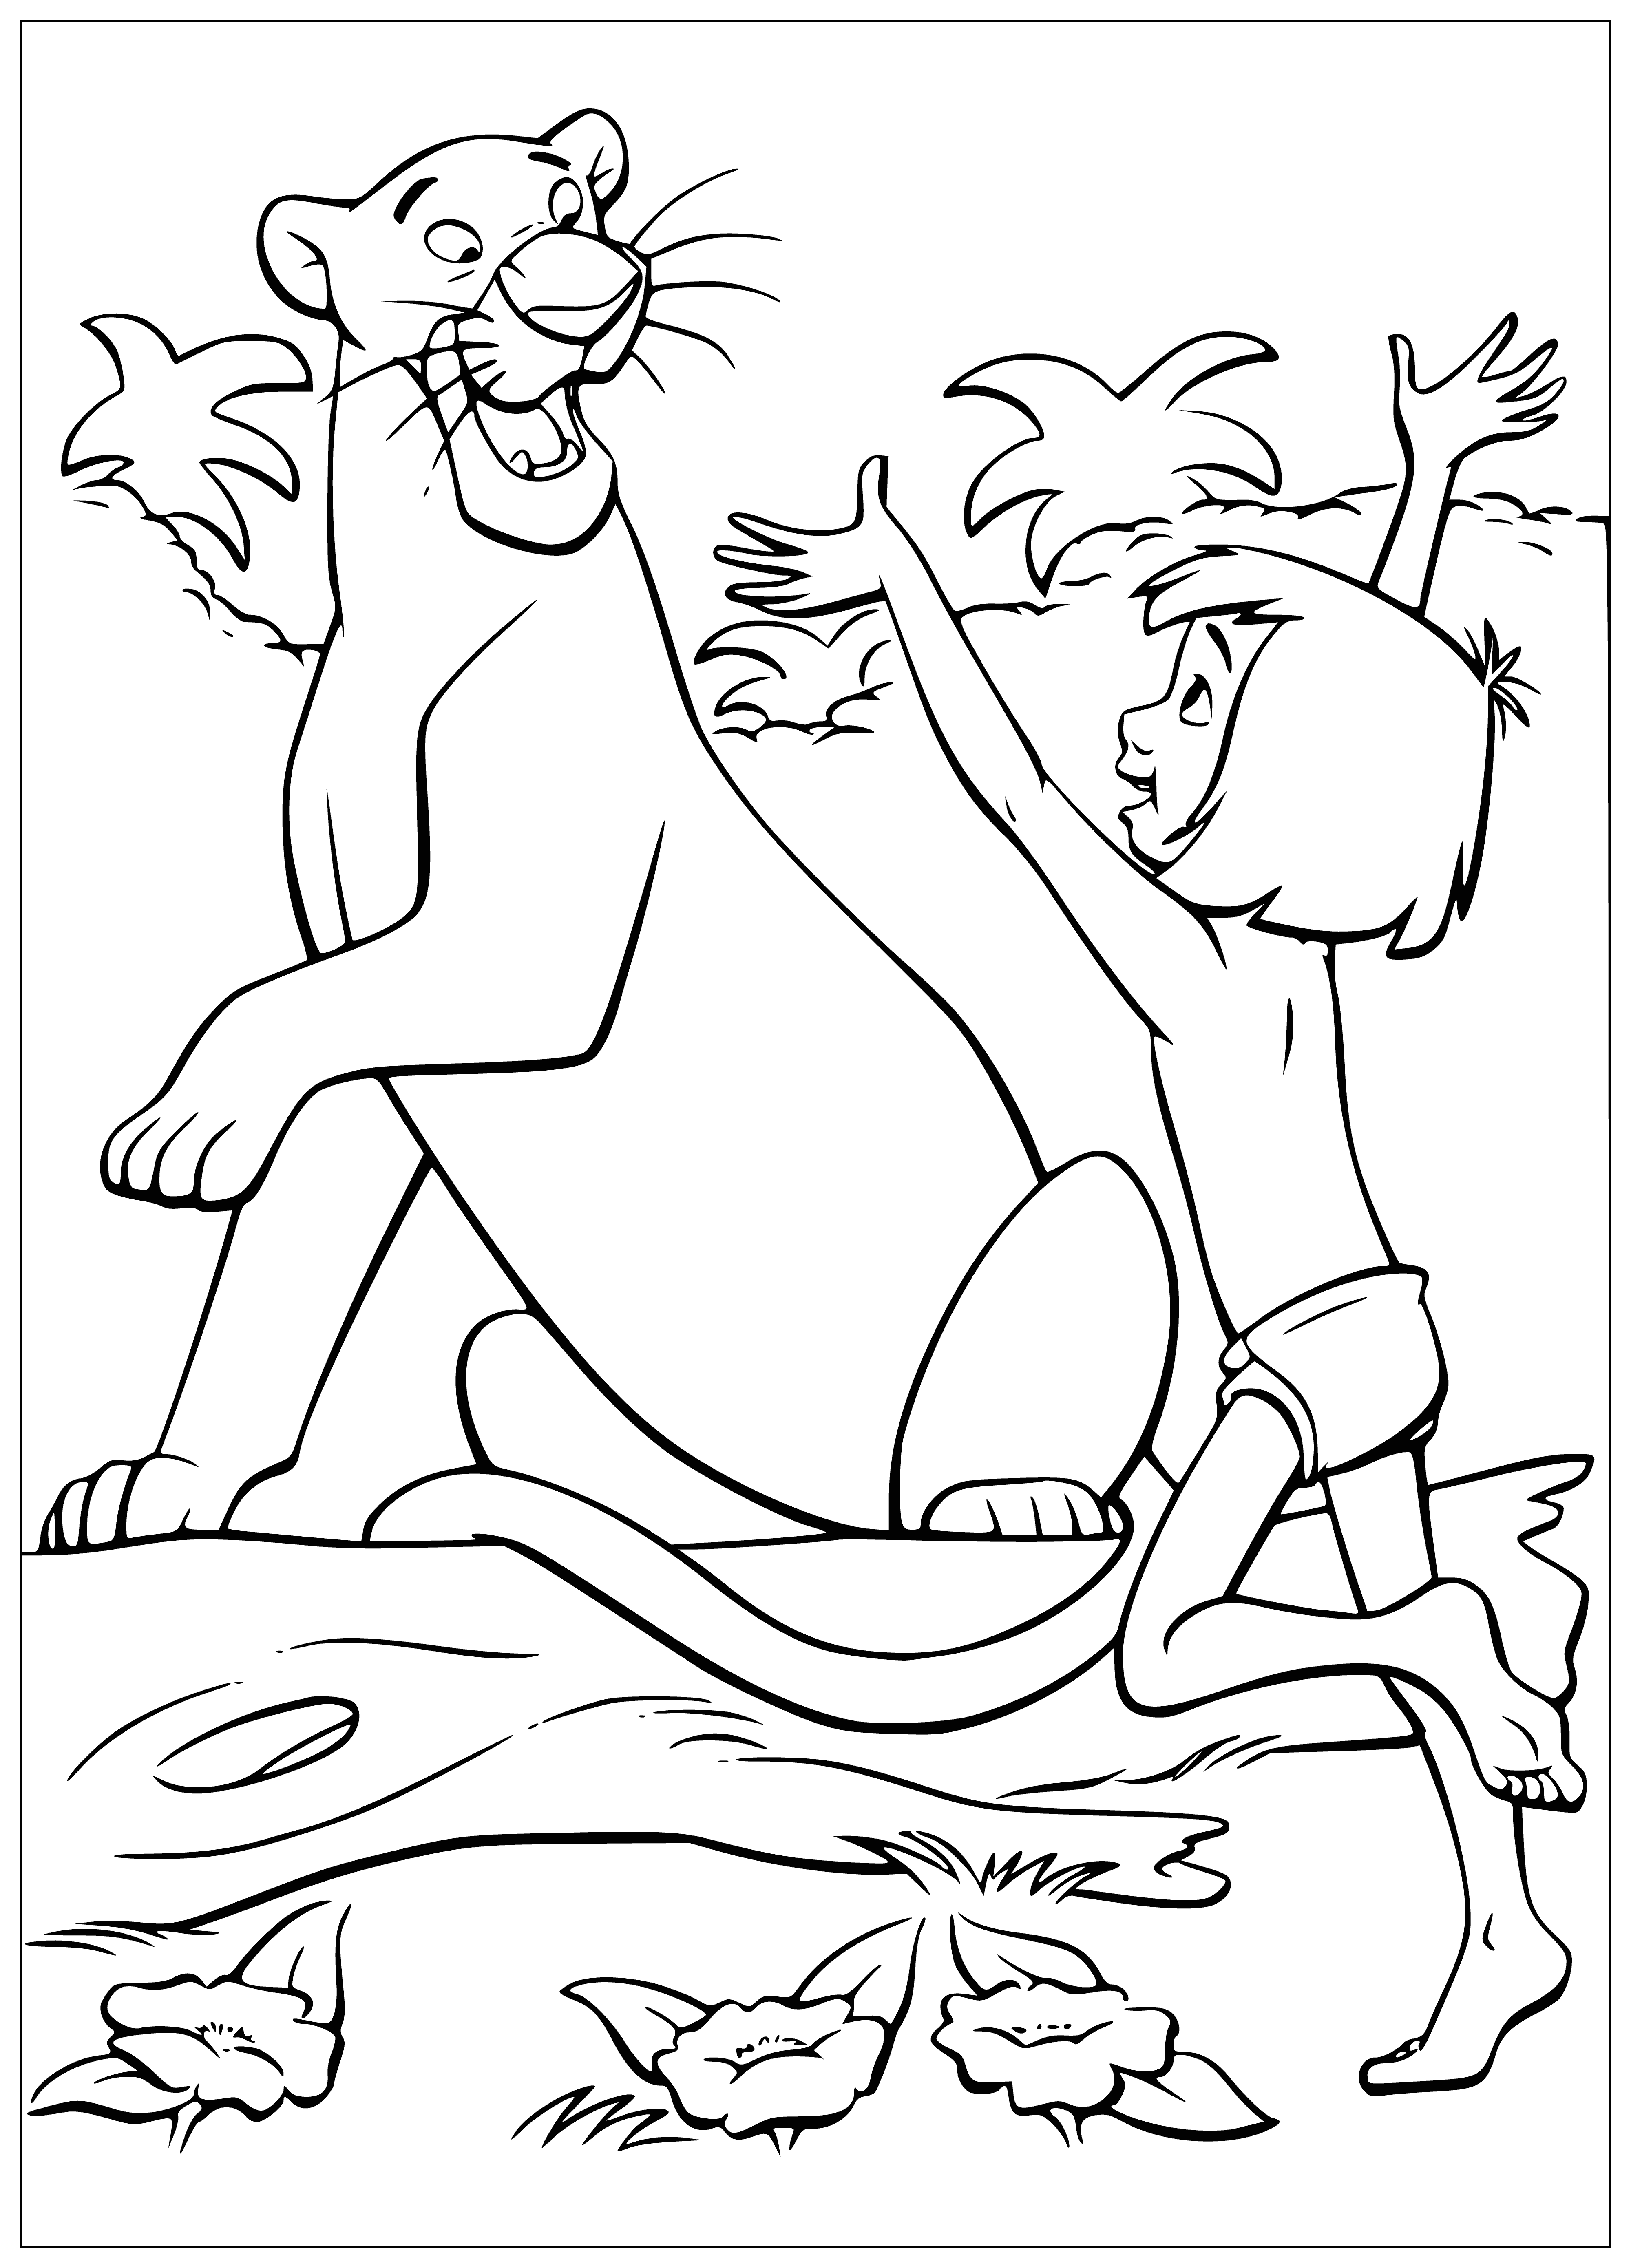 coloring page: Friends Bagira and Mowgli watch something in the distance while sitting on a tree branch.